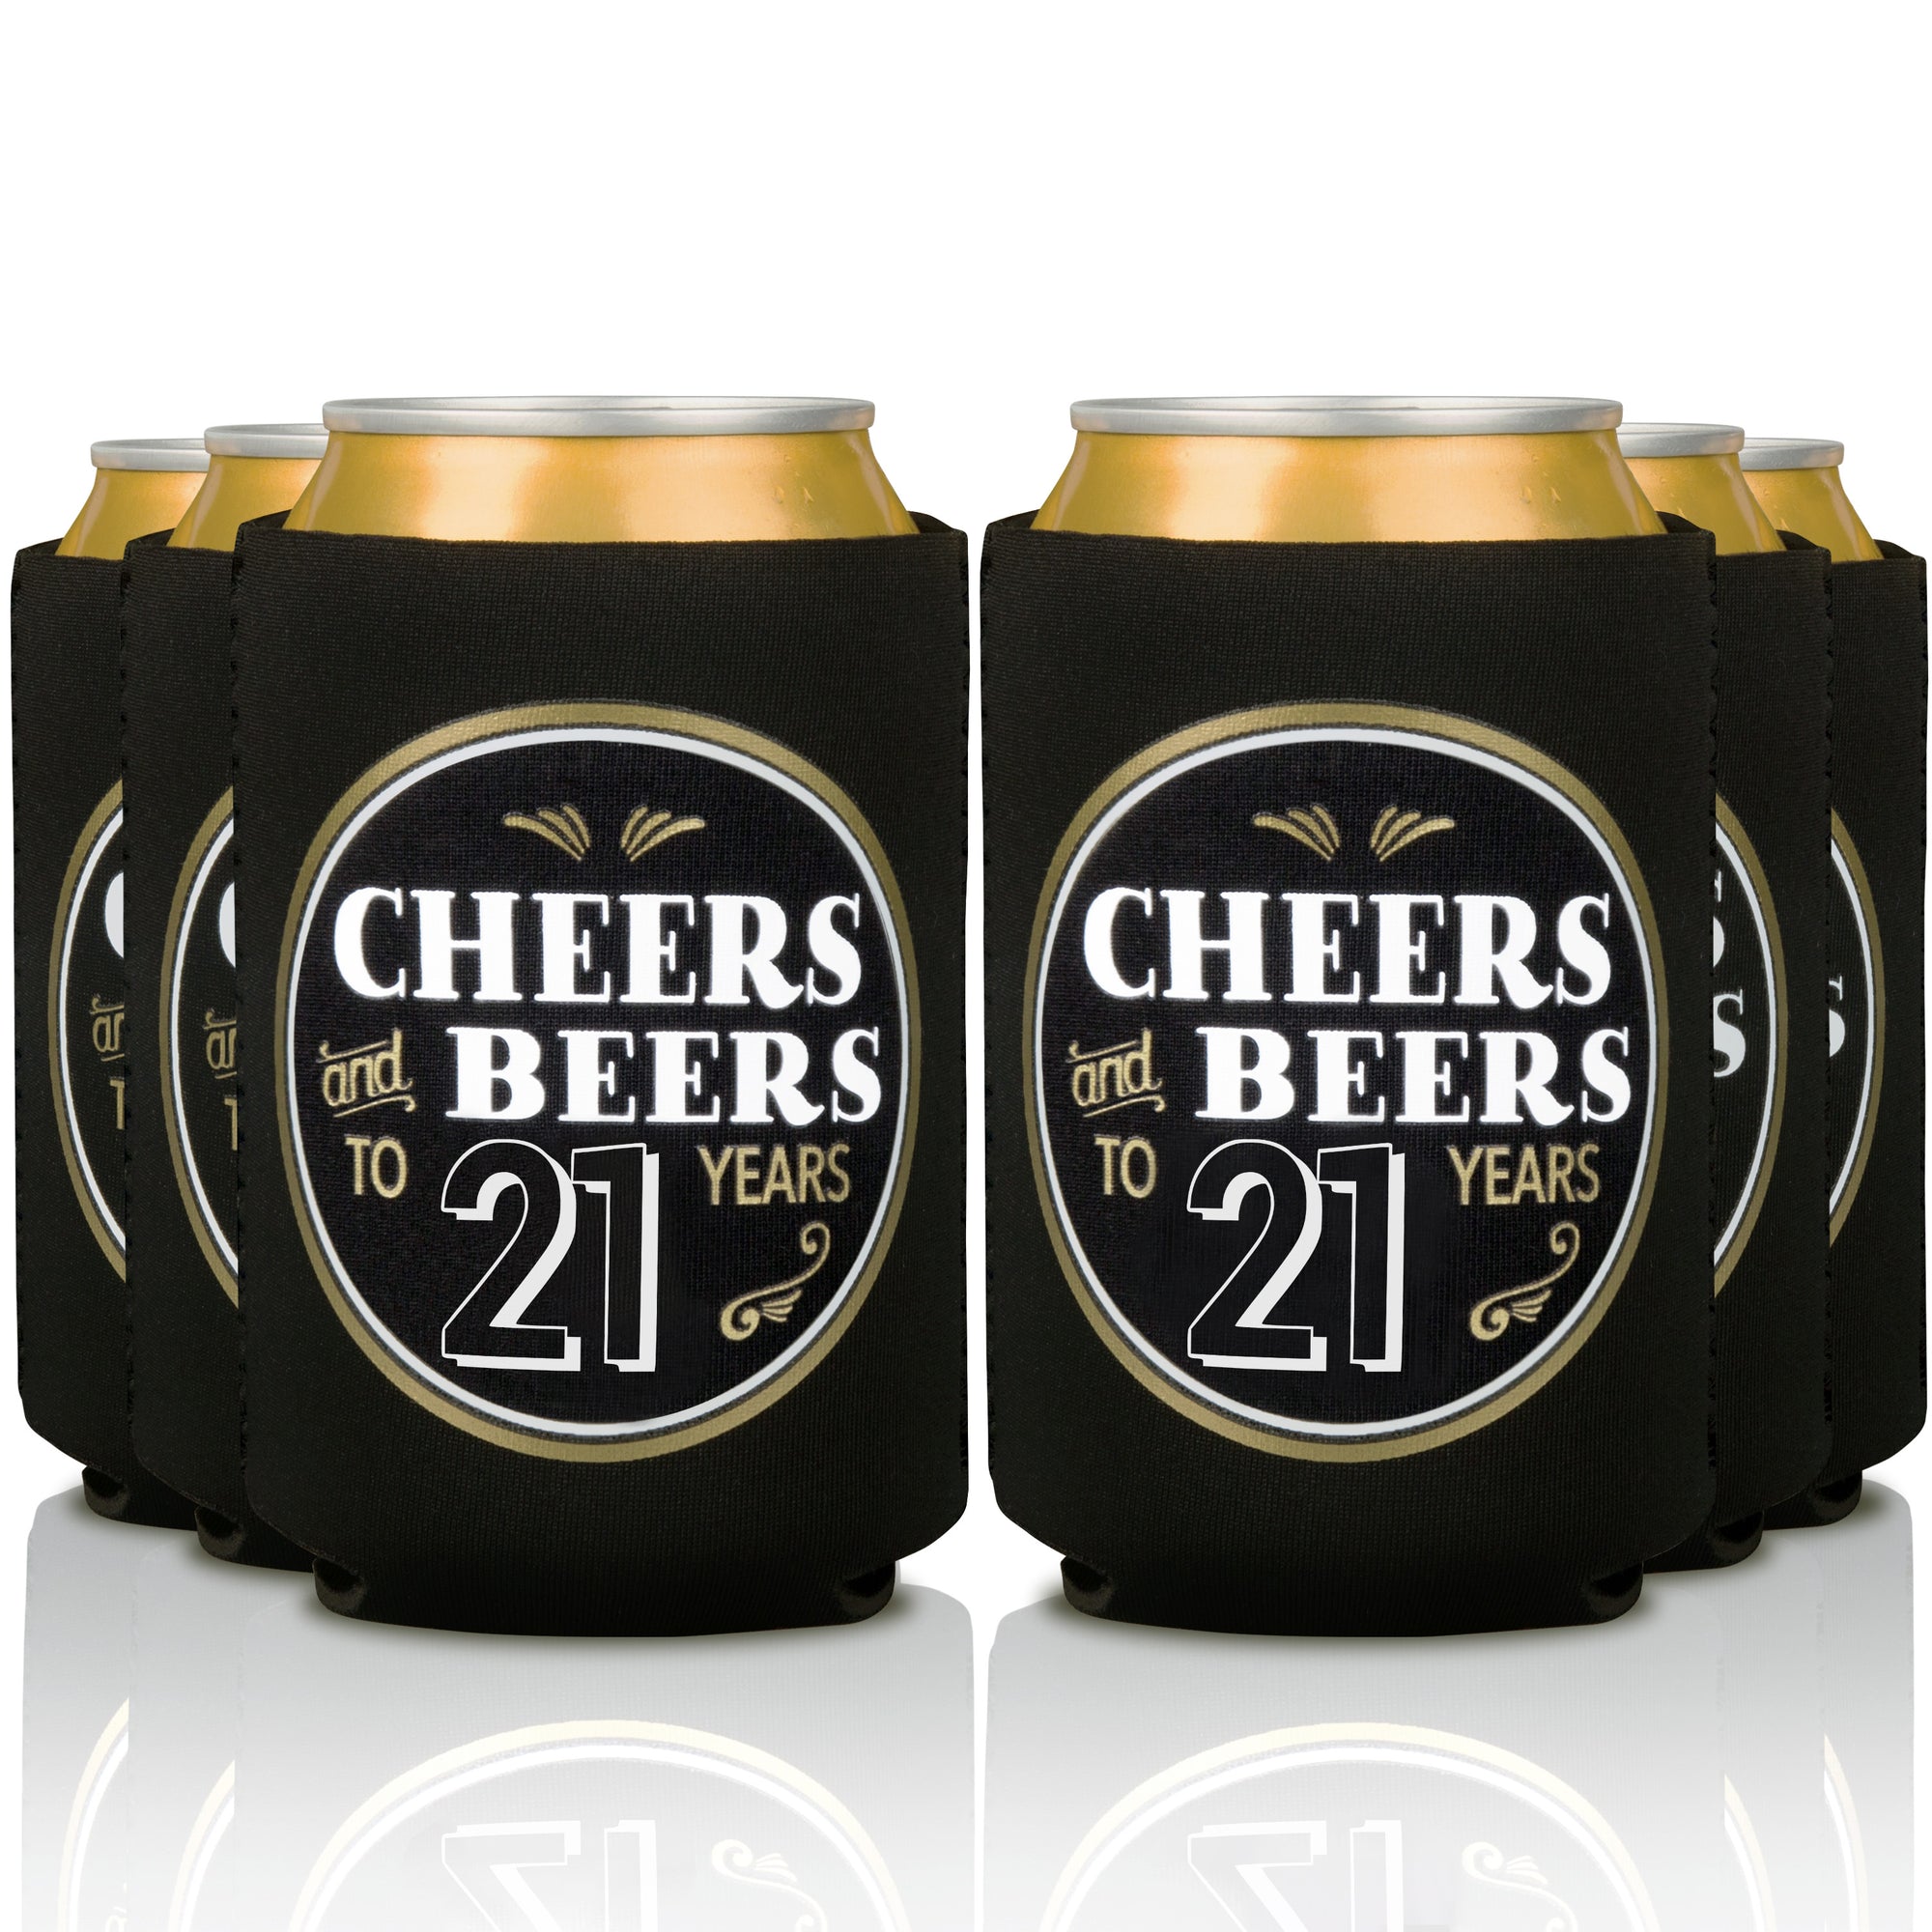 Cheers and Beers to 21 Years Coozies (12-Pack)